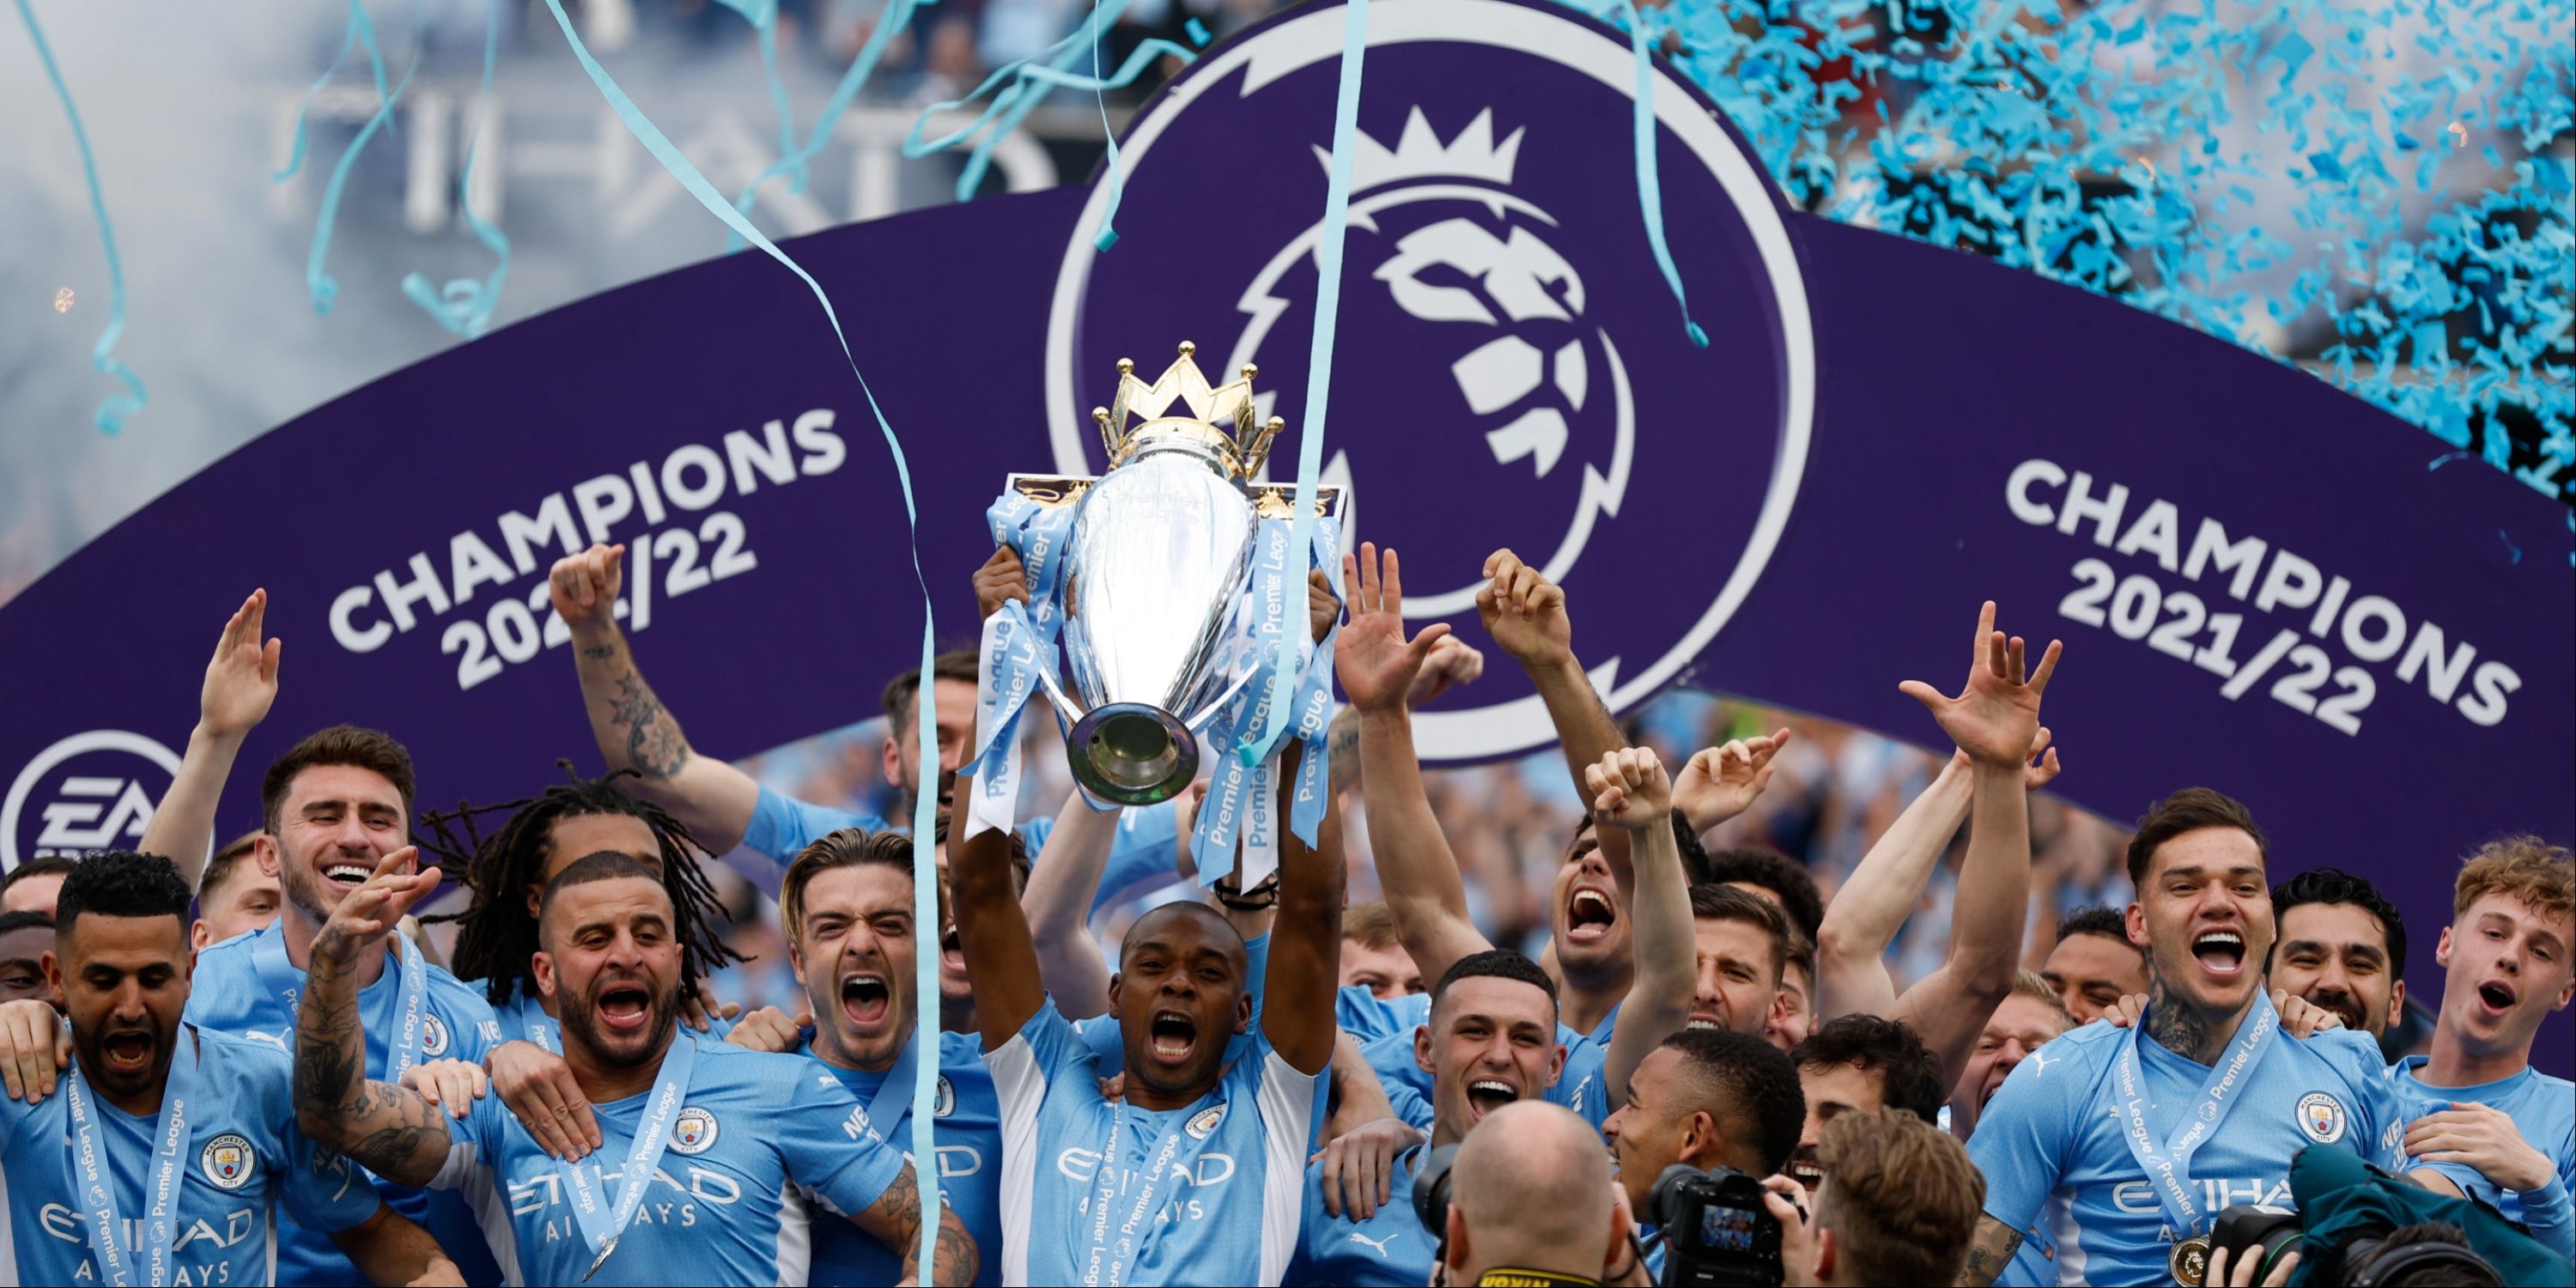 Manchester Citys' Fernandinho lifts the Premier League trophy with his teammates.